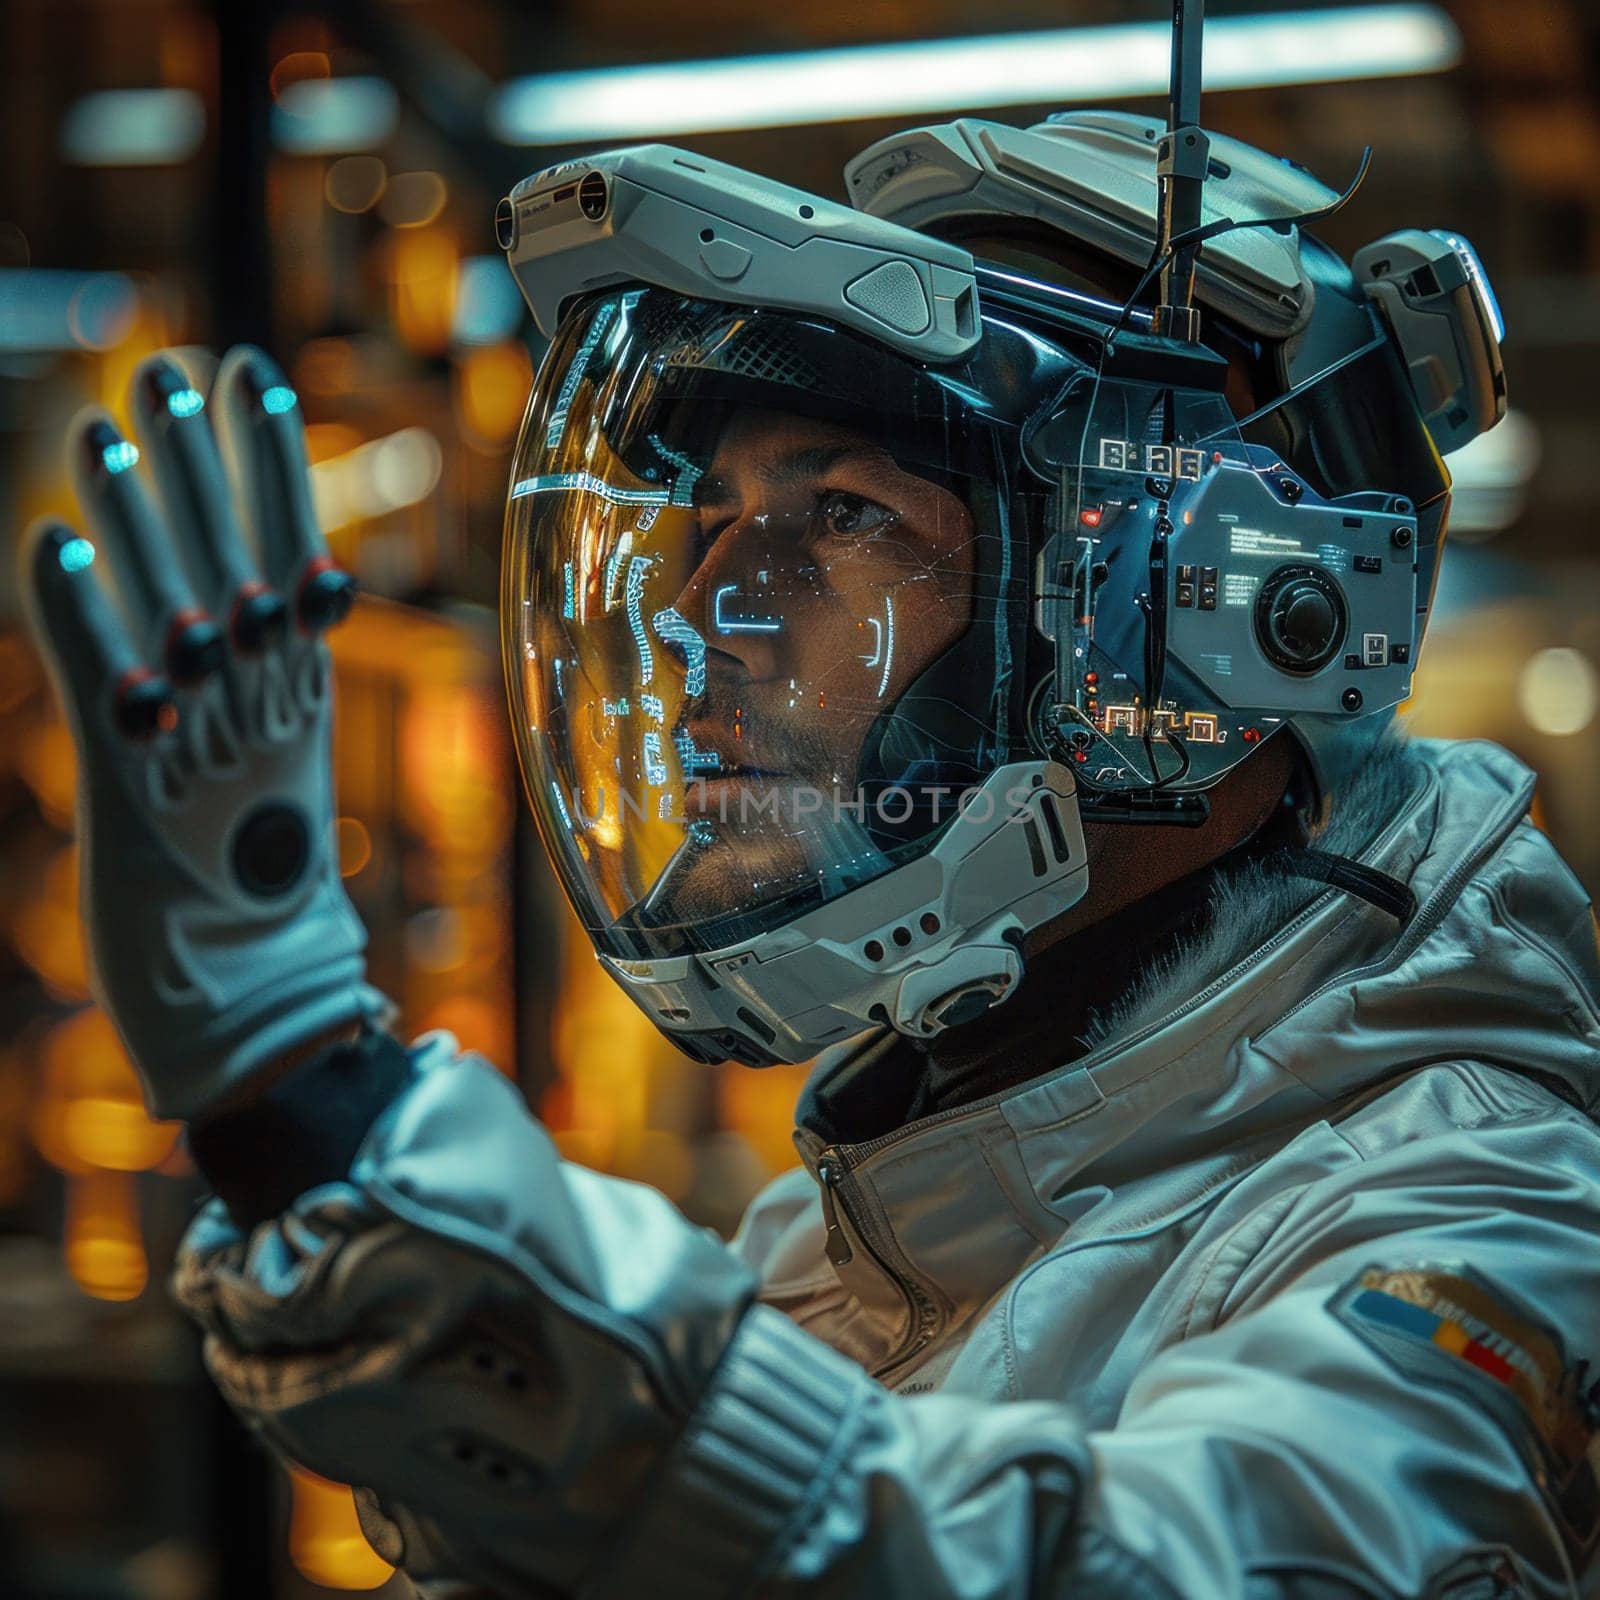 A man in a space suit taking photographs with a camera on a virtual reality mission in outer space.